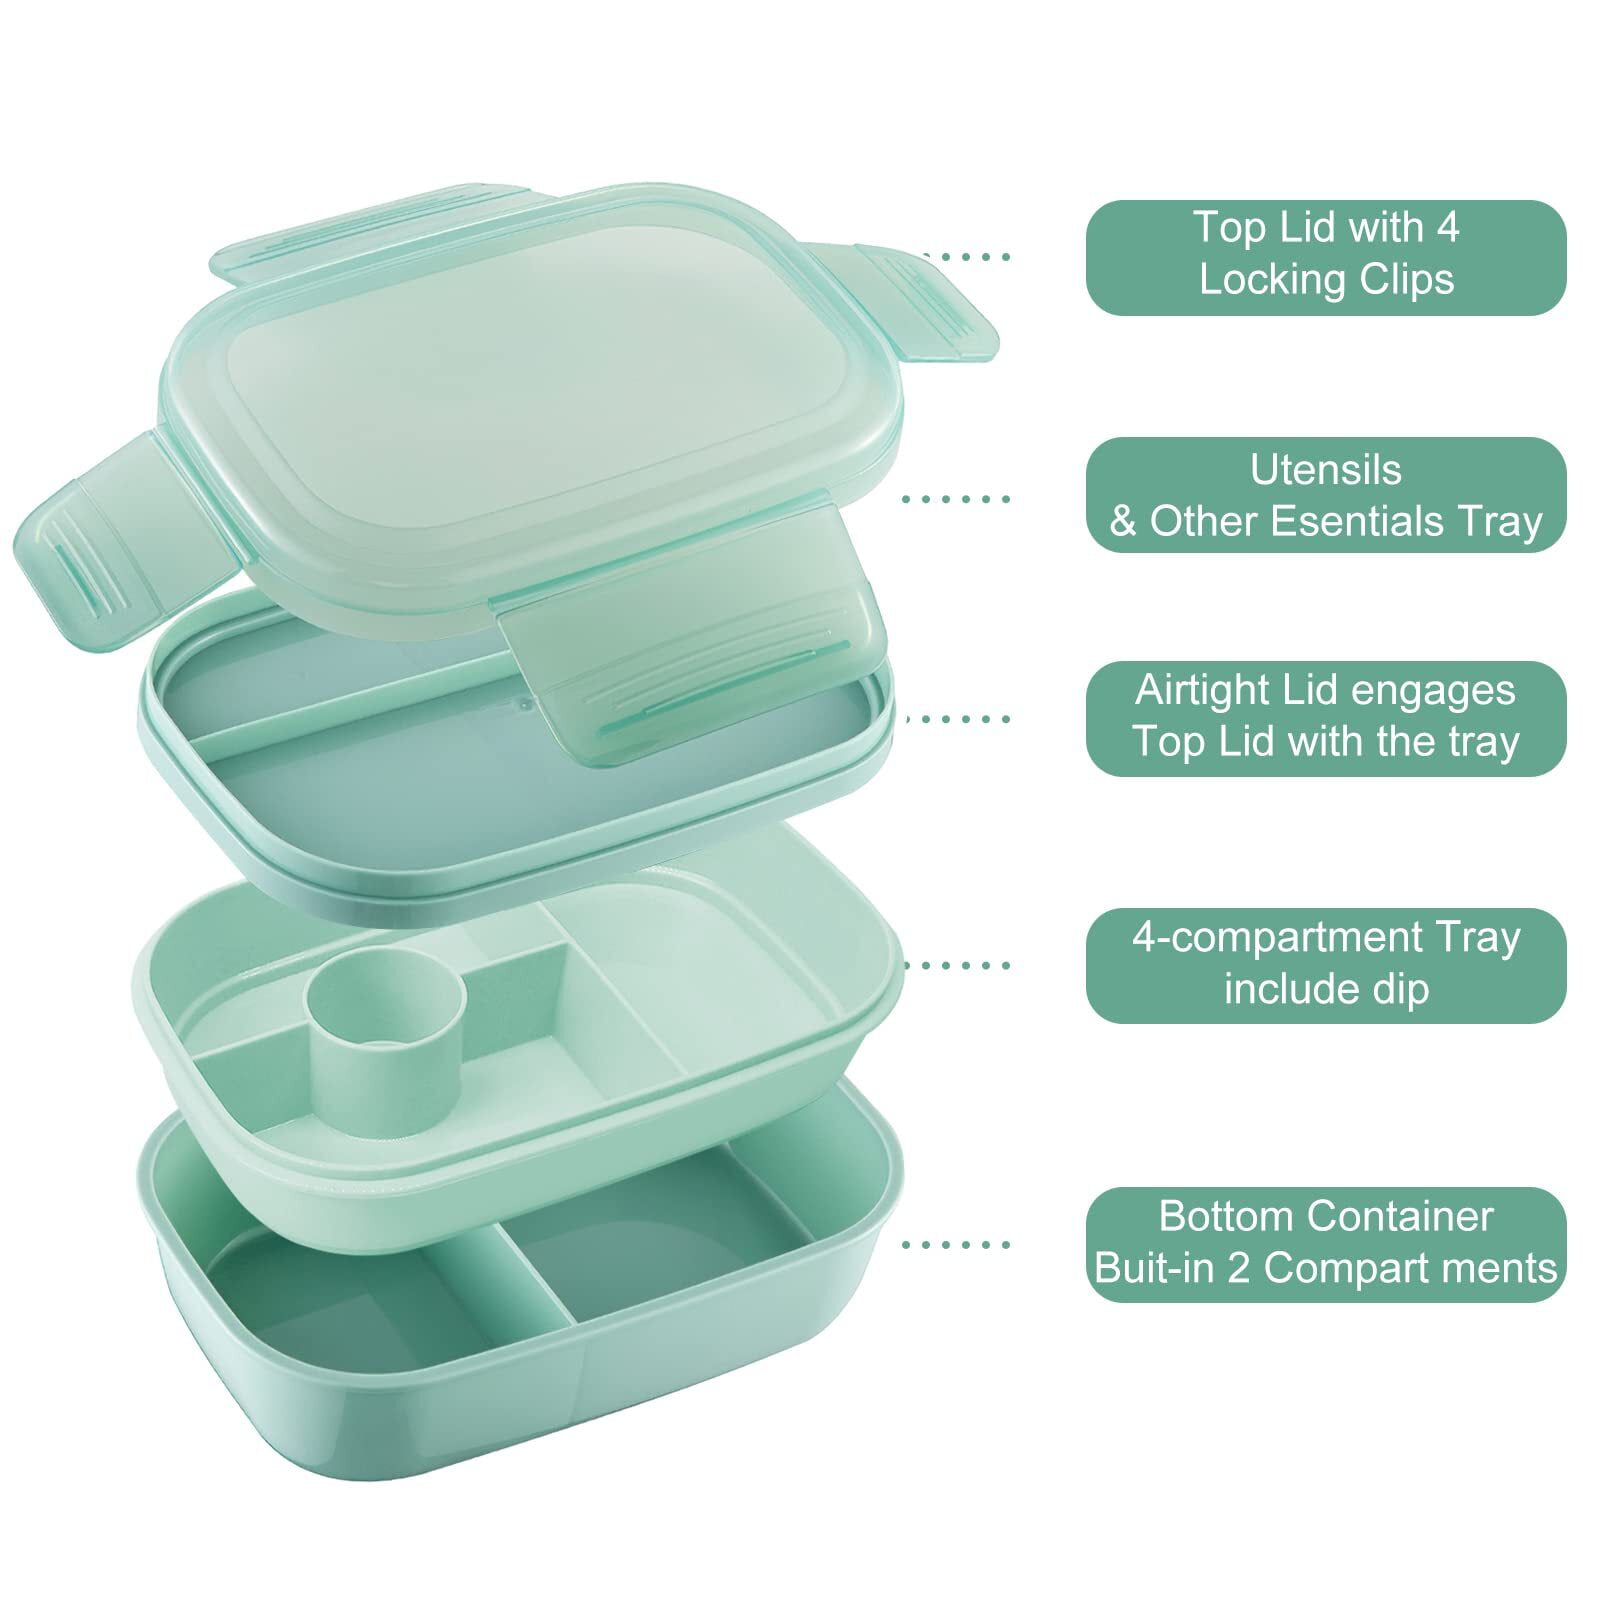 AOKIWO 27 Pcs Bento Box Lunch Box Kit, Stackable 3-in-1 Compartment Japanese  Lunch Box Set, with Leakproof Lunch Container for Kids and Adults 